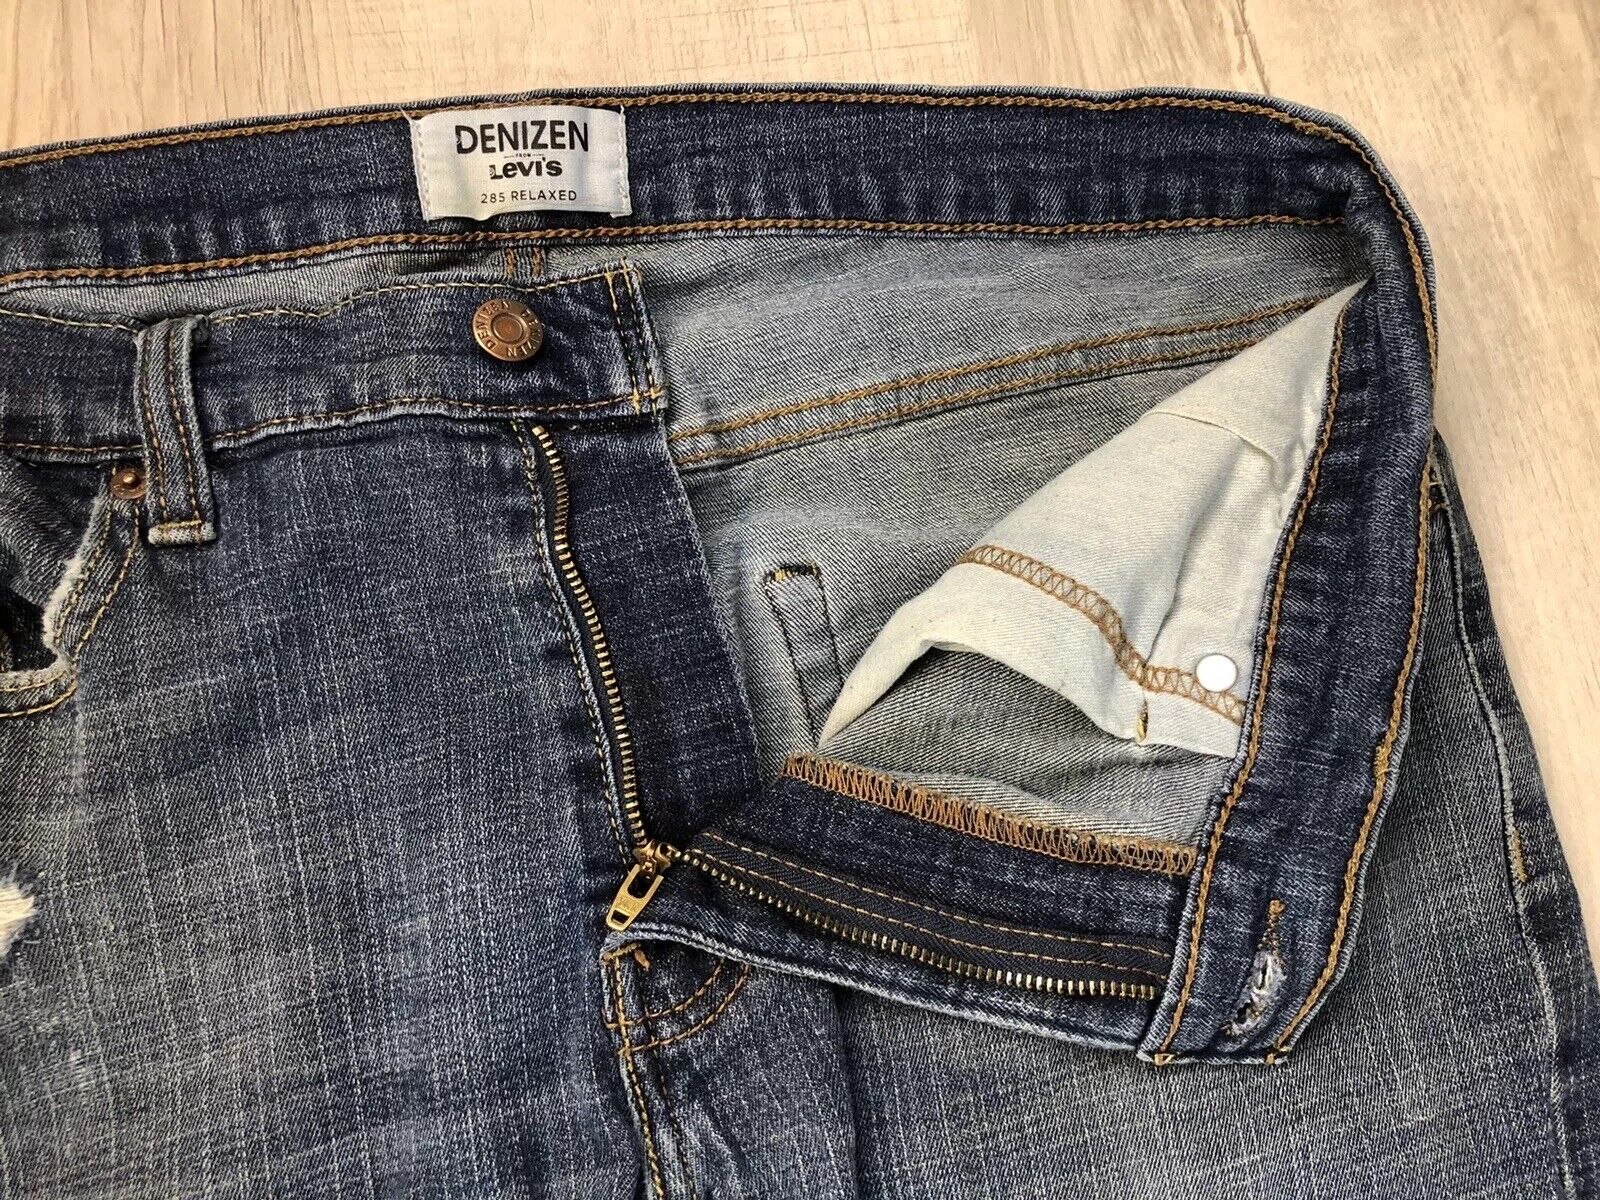 Denizen From Levi’s 285 Relaxed Fit Jeans Distres… - image 15